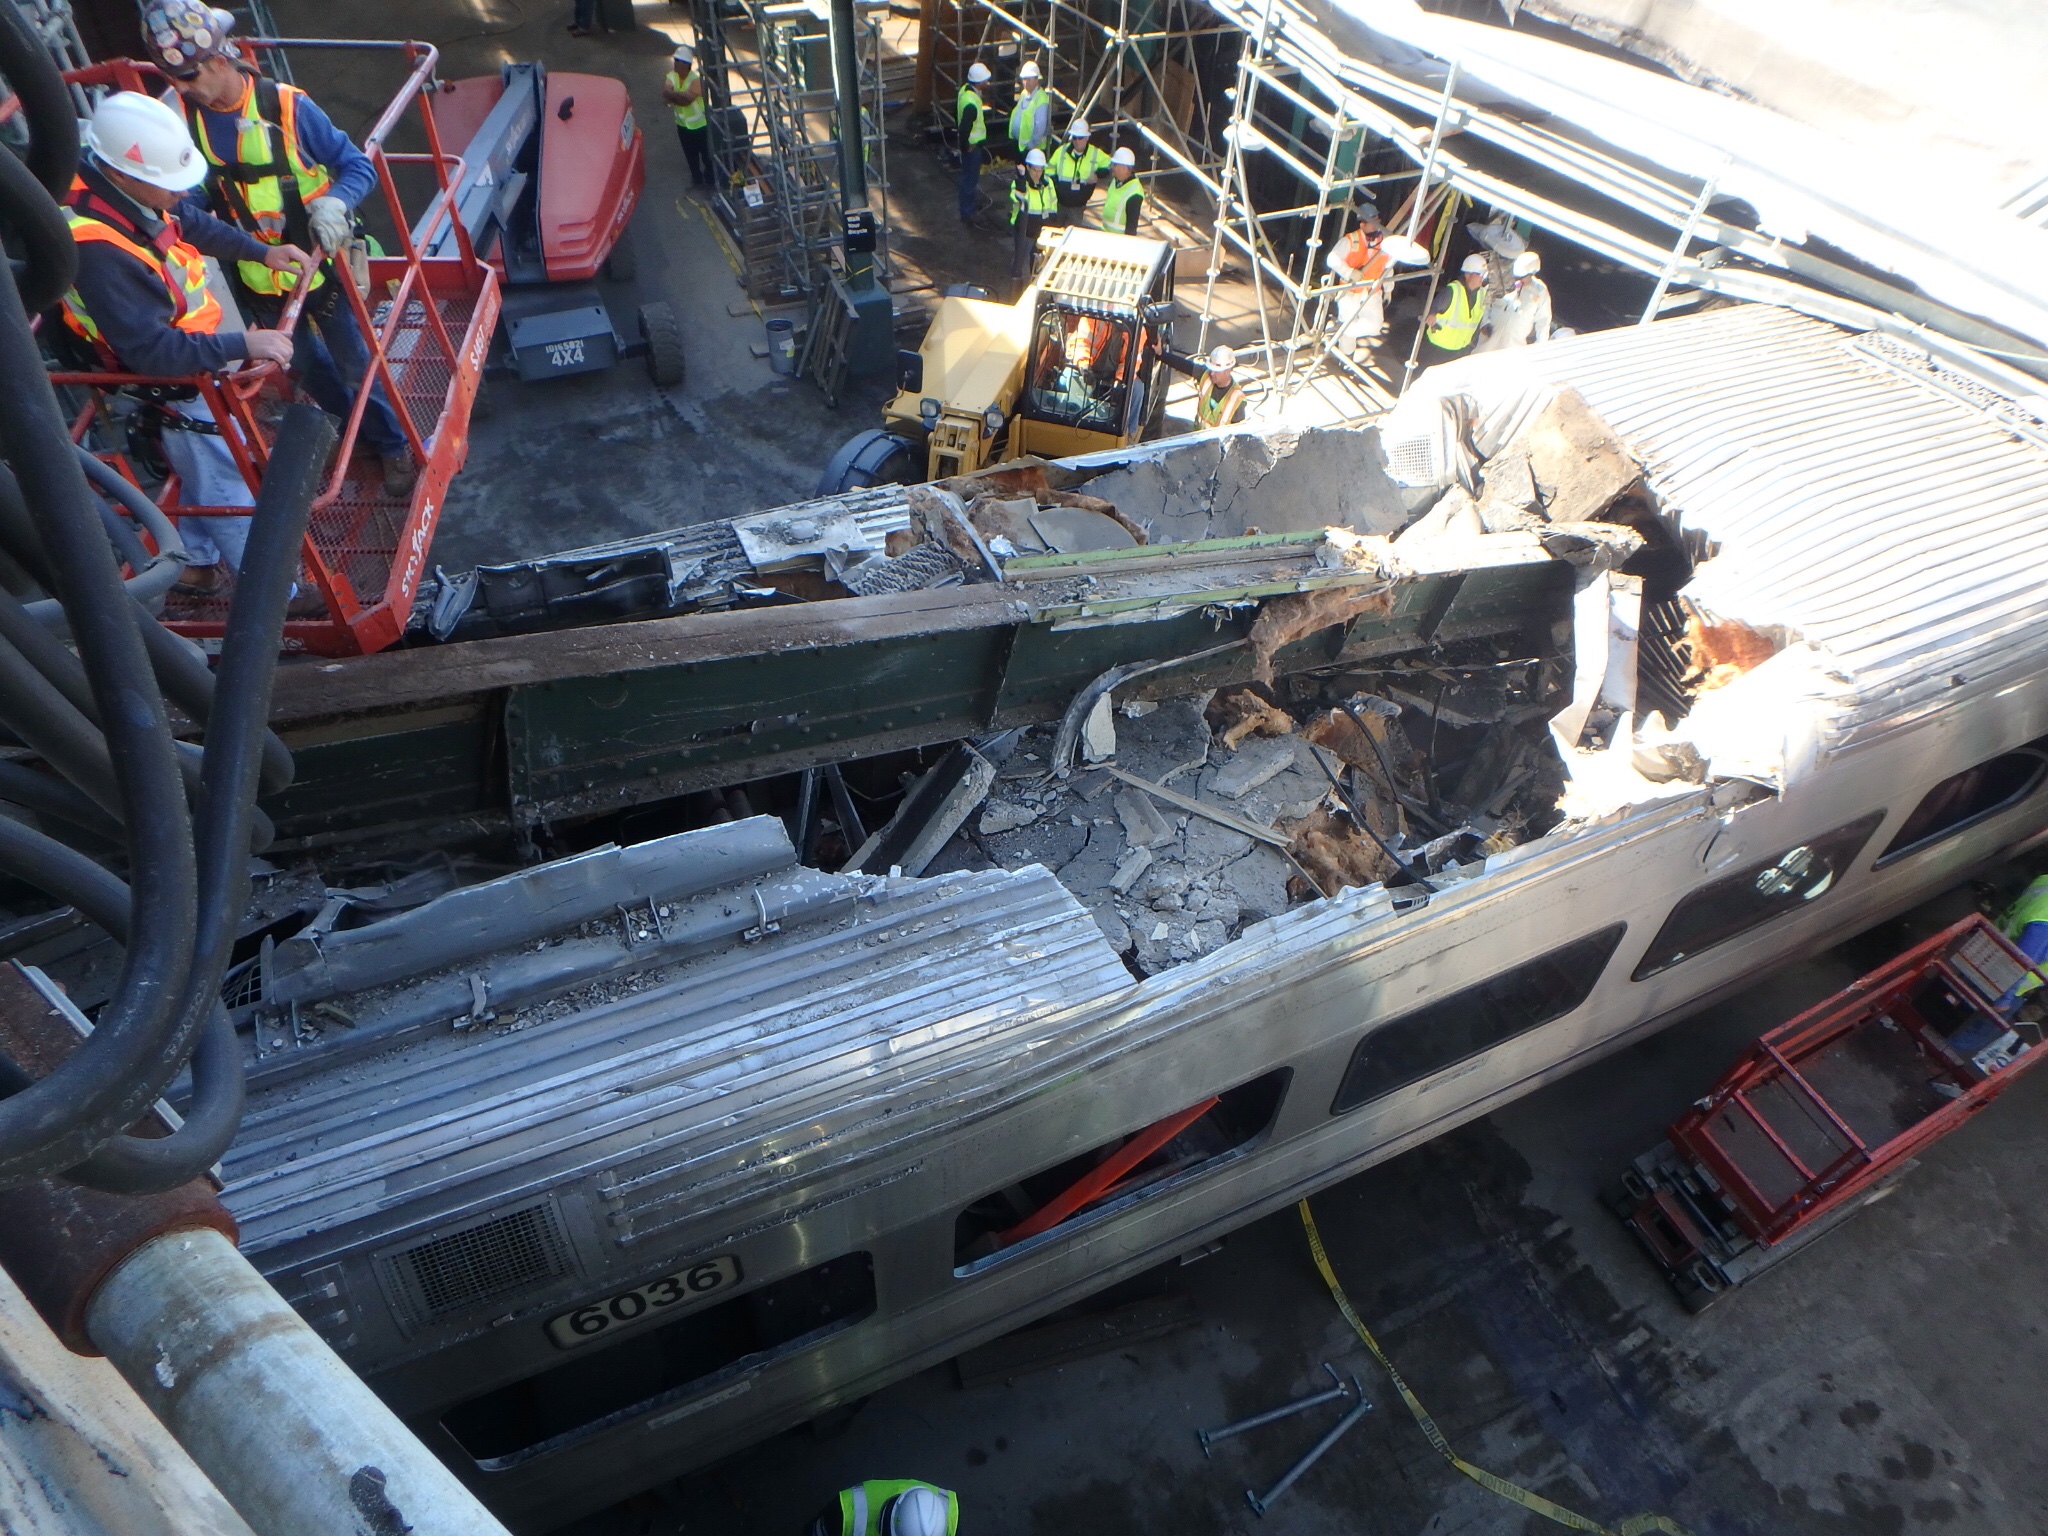 New Jersey Transit's Hoboken crash was a tragic illustration of an agency in disarray. (Source: NTSB)